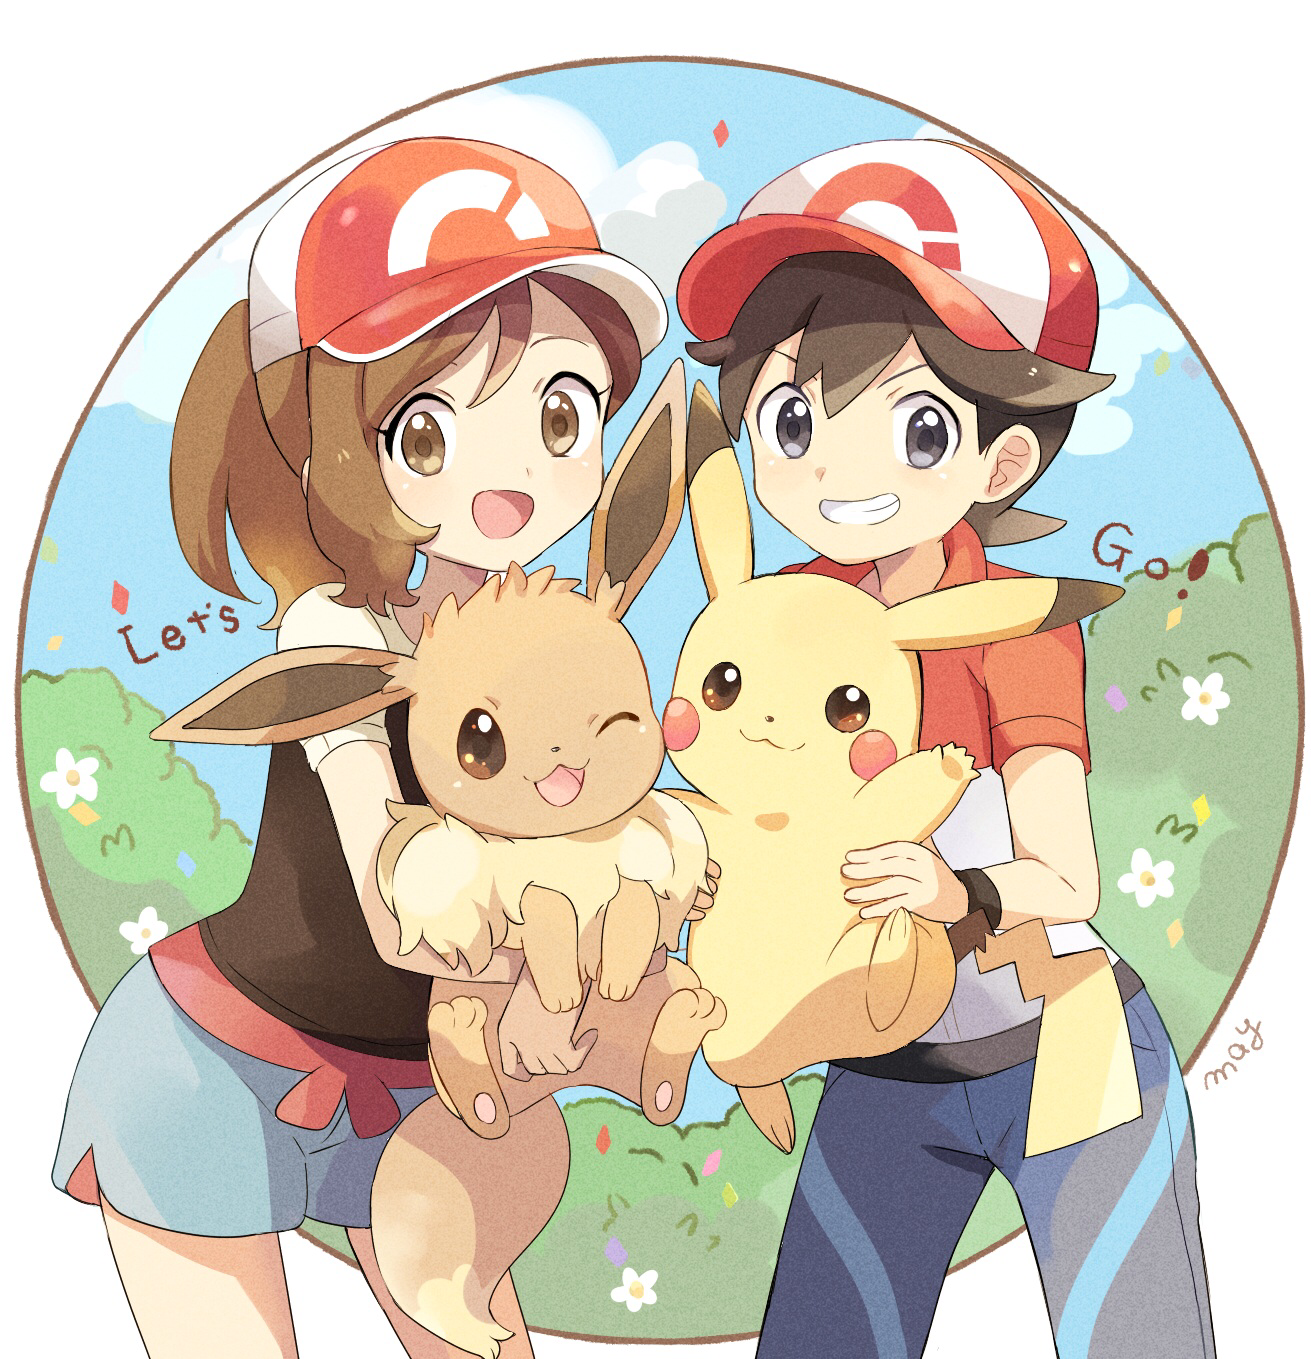 Pokémon: Let's Go Pikachu and Let's Go Eevee Art by picca_